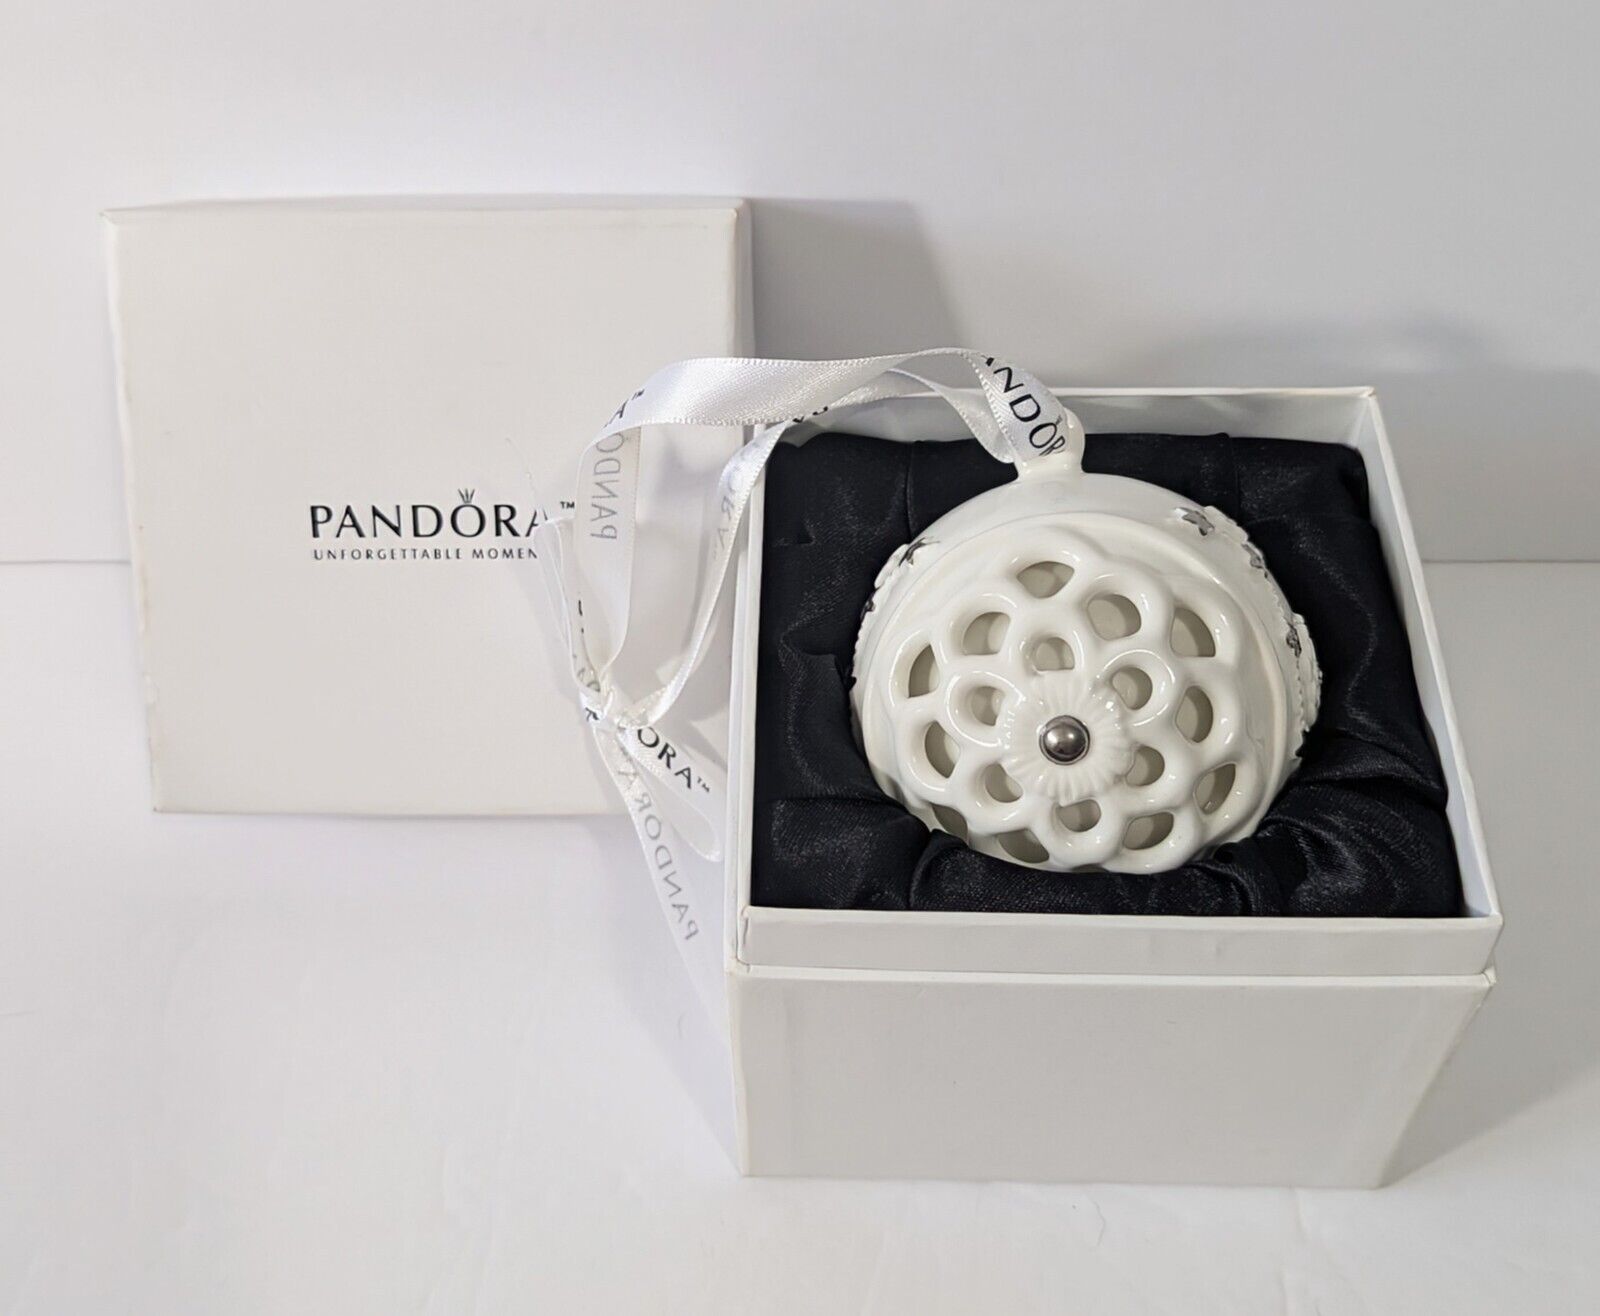 Pandora 2011 White Porcelain Unforgettable Moments Christmas Ornament in Box